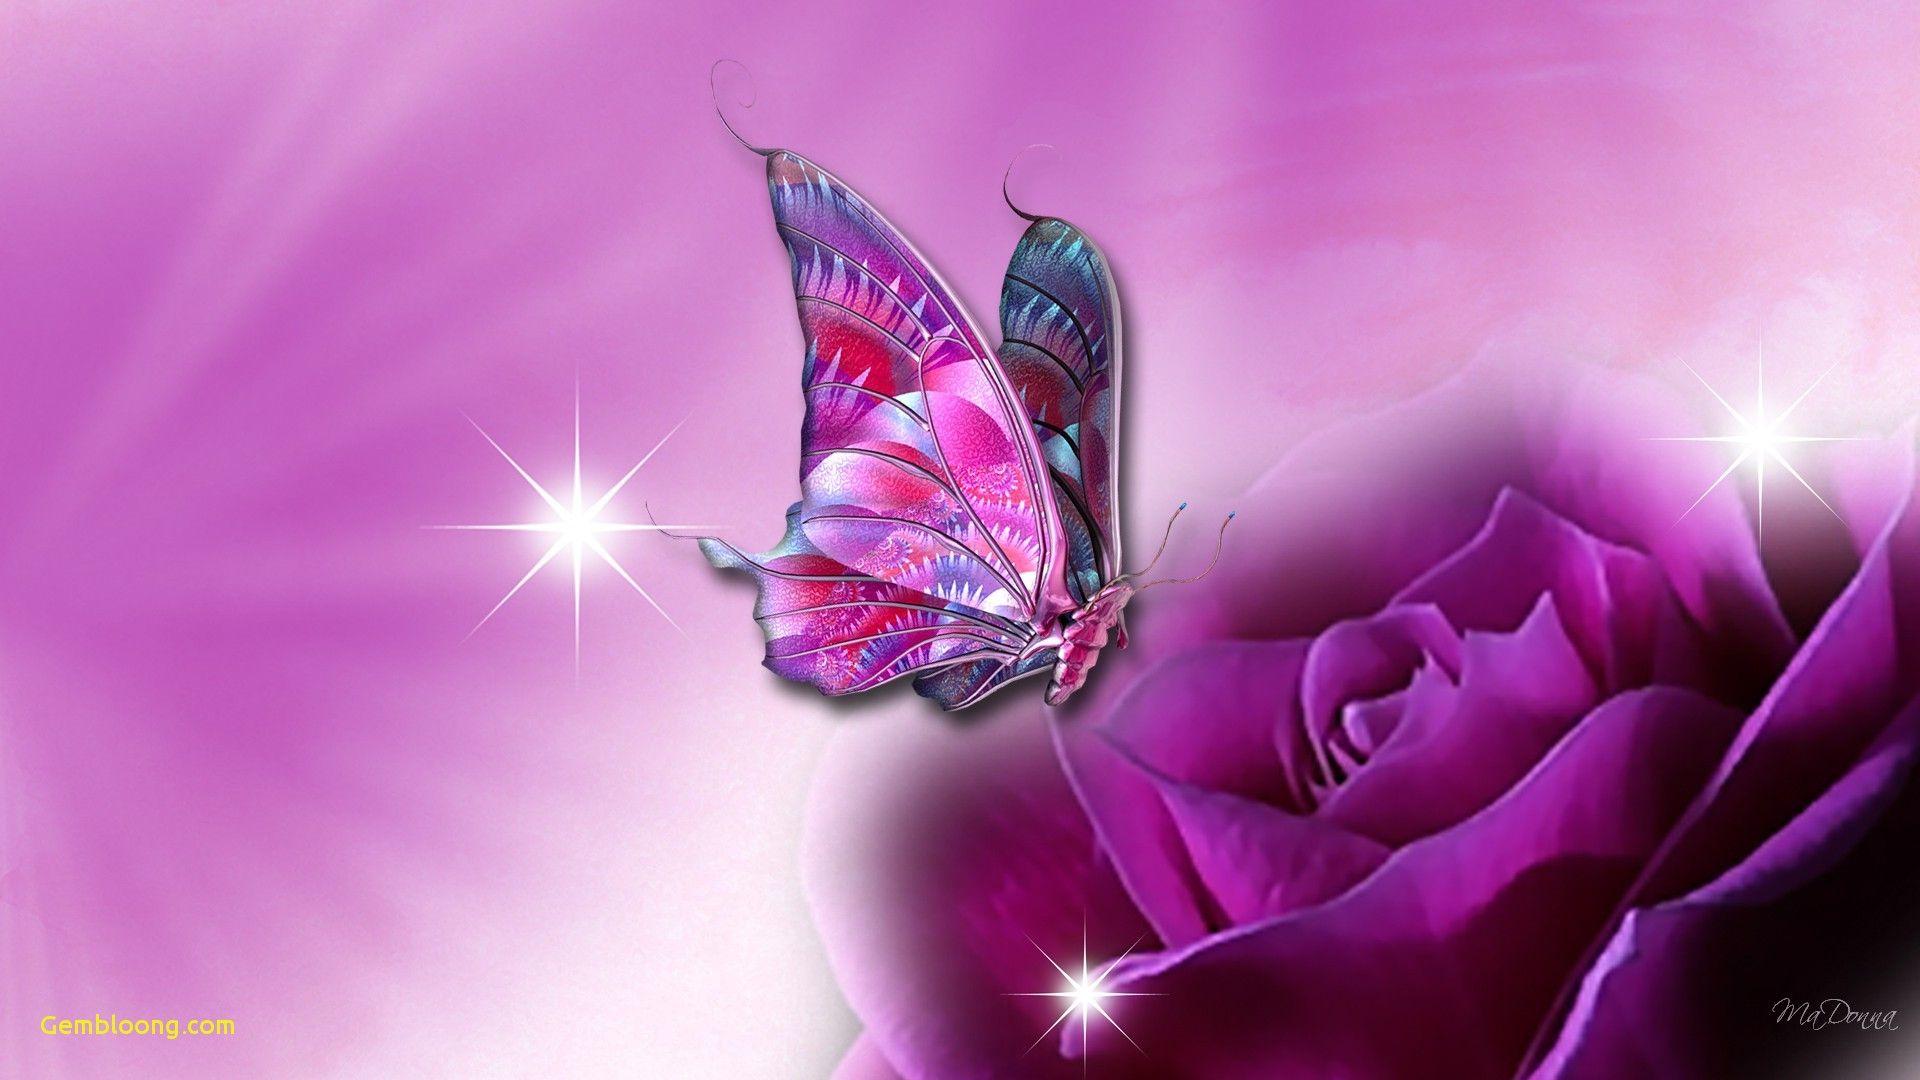 Hd 3D Wallpaper butterfly Awesome Unique Wallpaper Wallpaper